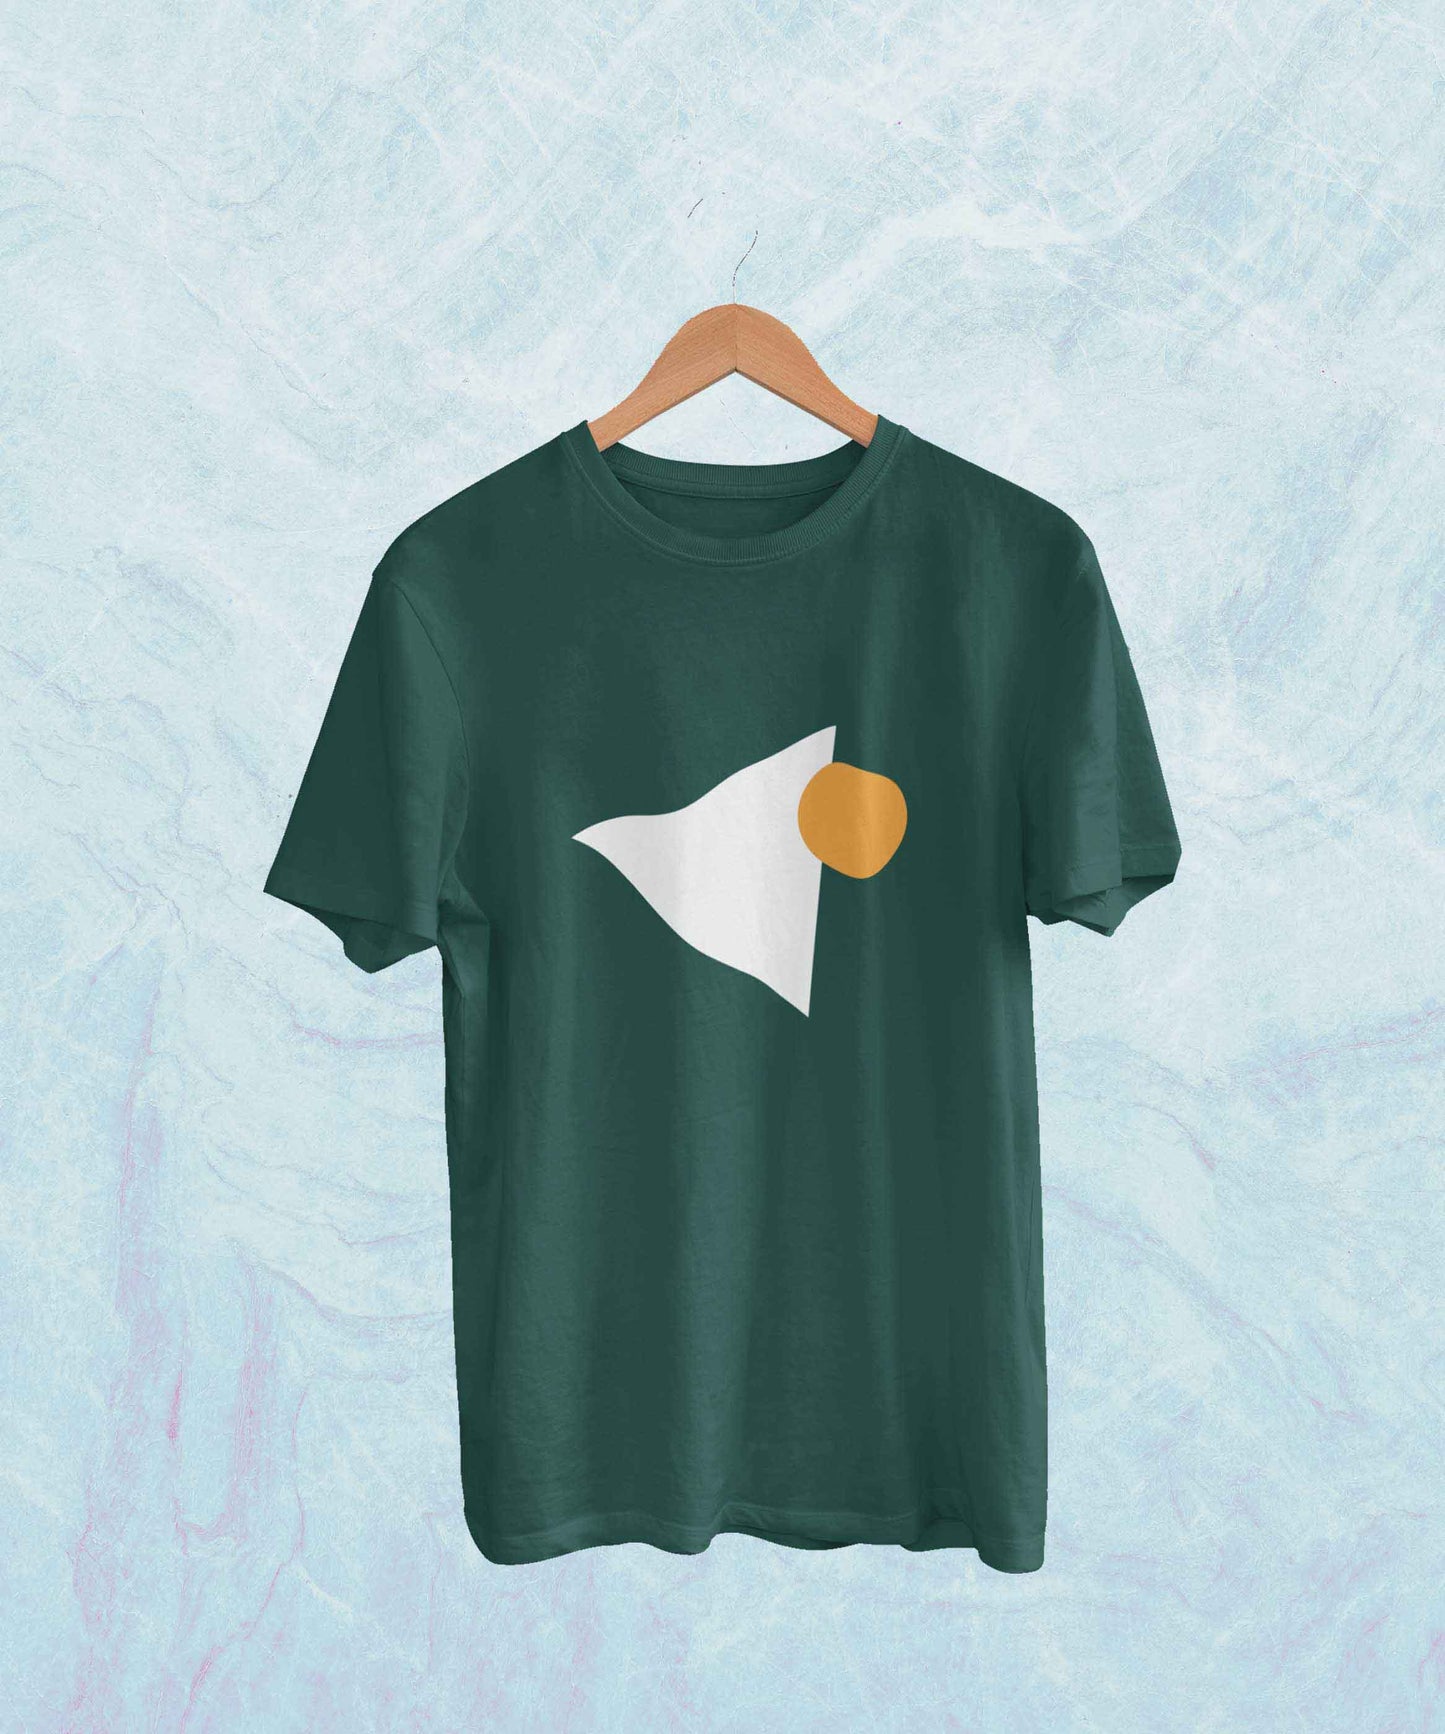 Triangle printed t shirt for men in petrol blue and bottle green